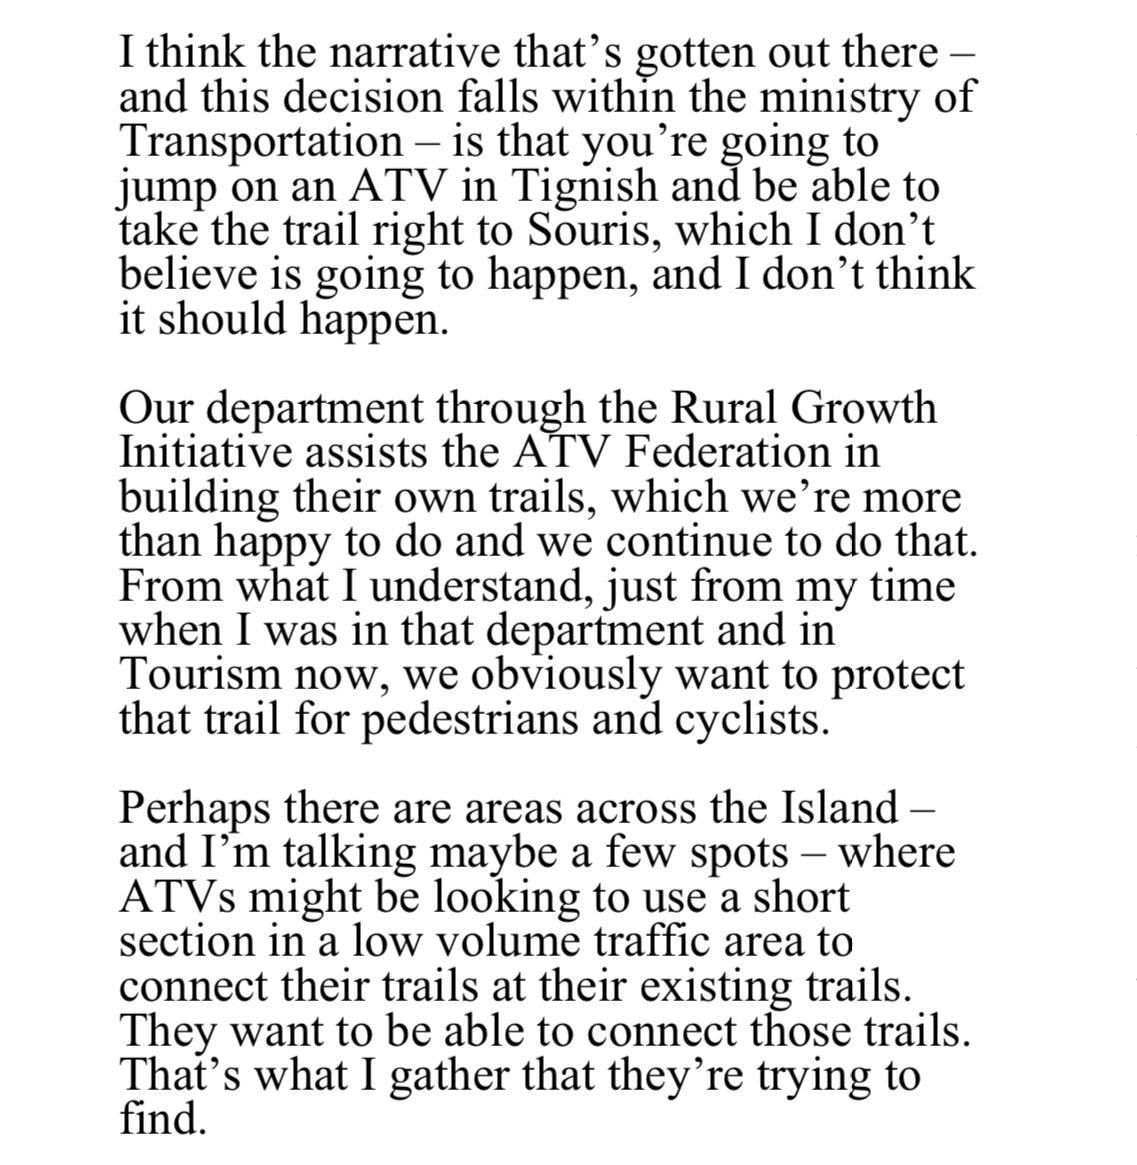 Minister @CoryDeaglePEI is trying to walk a fine line. What is needed is a very clear statement of unqualified support for Confederation Trail to be ATV free. No added access. 16 per cent, and growing, of tourists use the trail. There is no sane argument for ATV expansion #pei